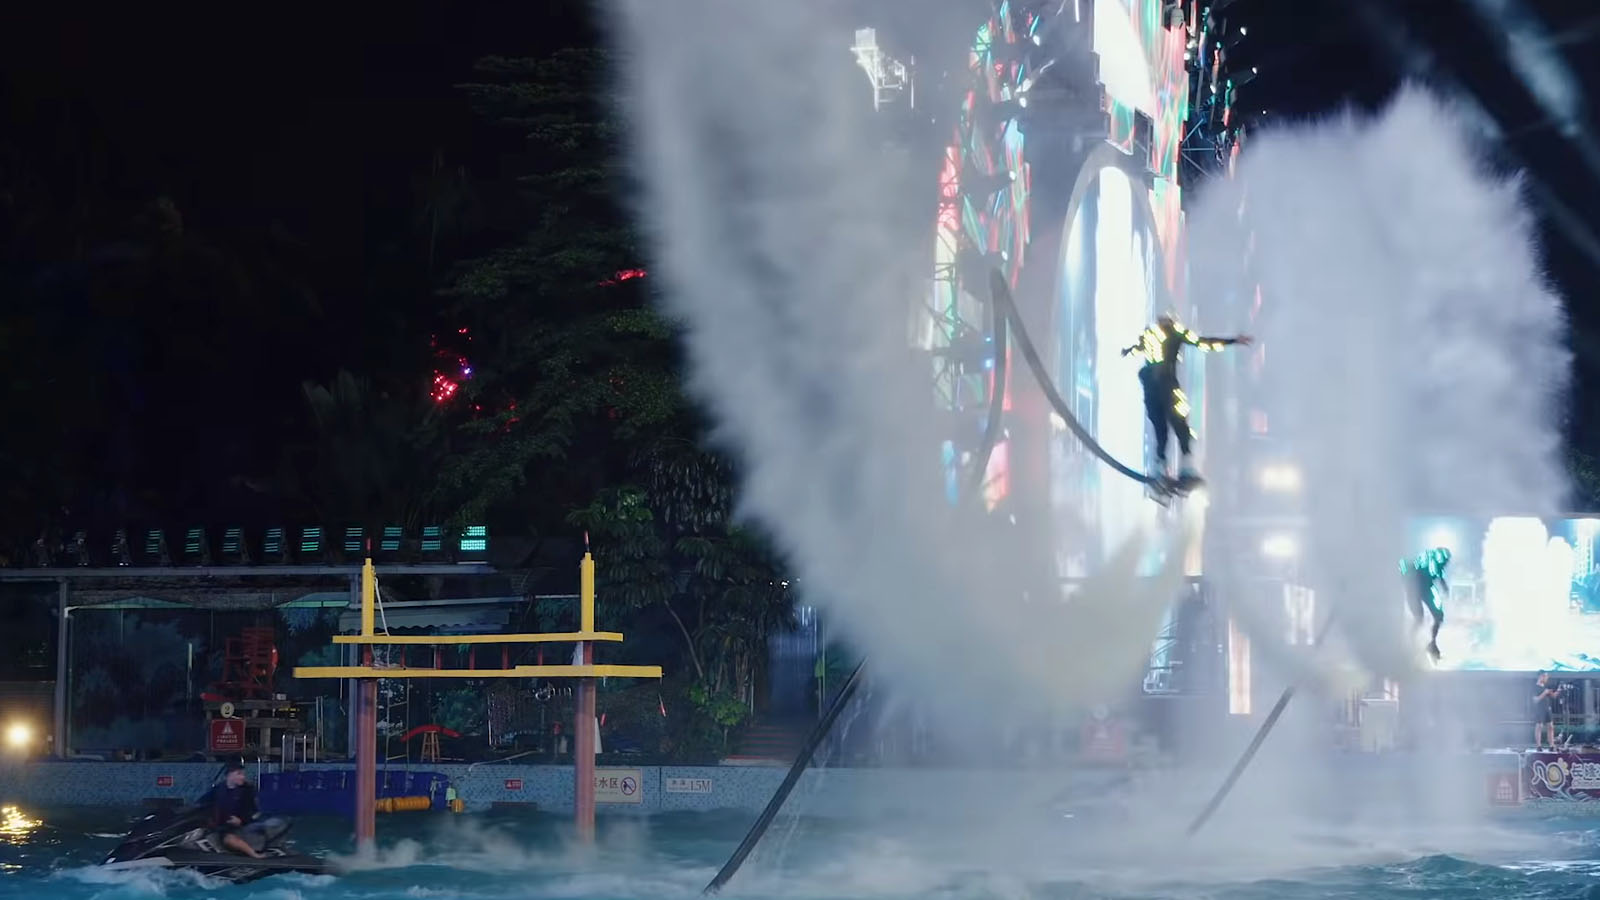 Water park display in Guangzhou from the documentary Ascension. Image © MTV Documentary Films